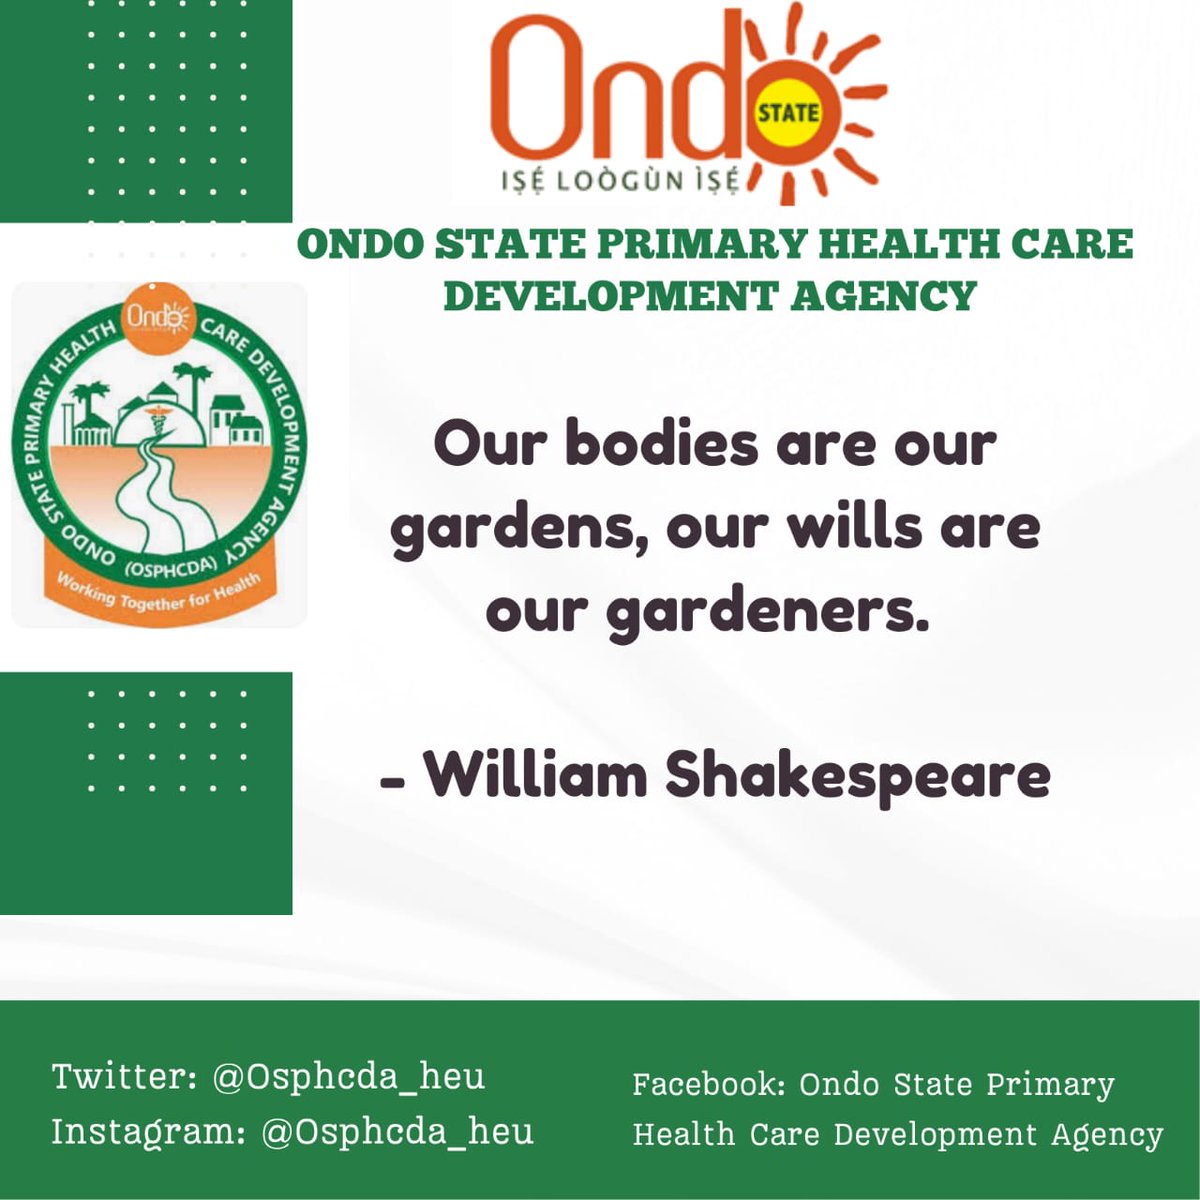 For a garden to flourish, it needs a good gardener, for our body to flourish, our wills need to be good and strong. #HappySunday

#HealthIsWealth #OurHealthMatters